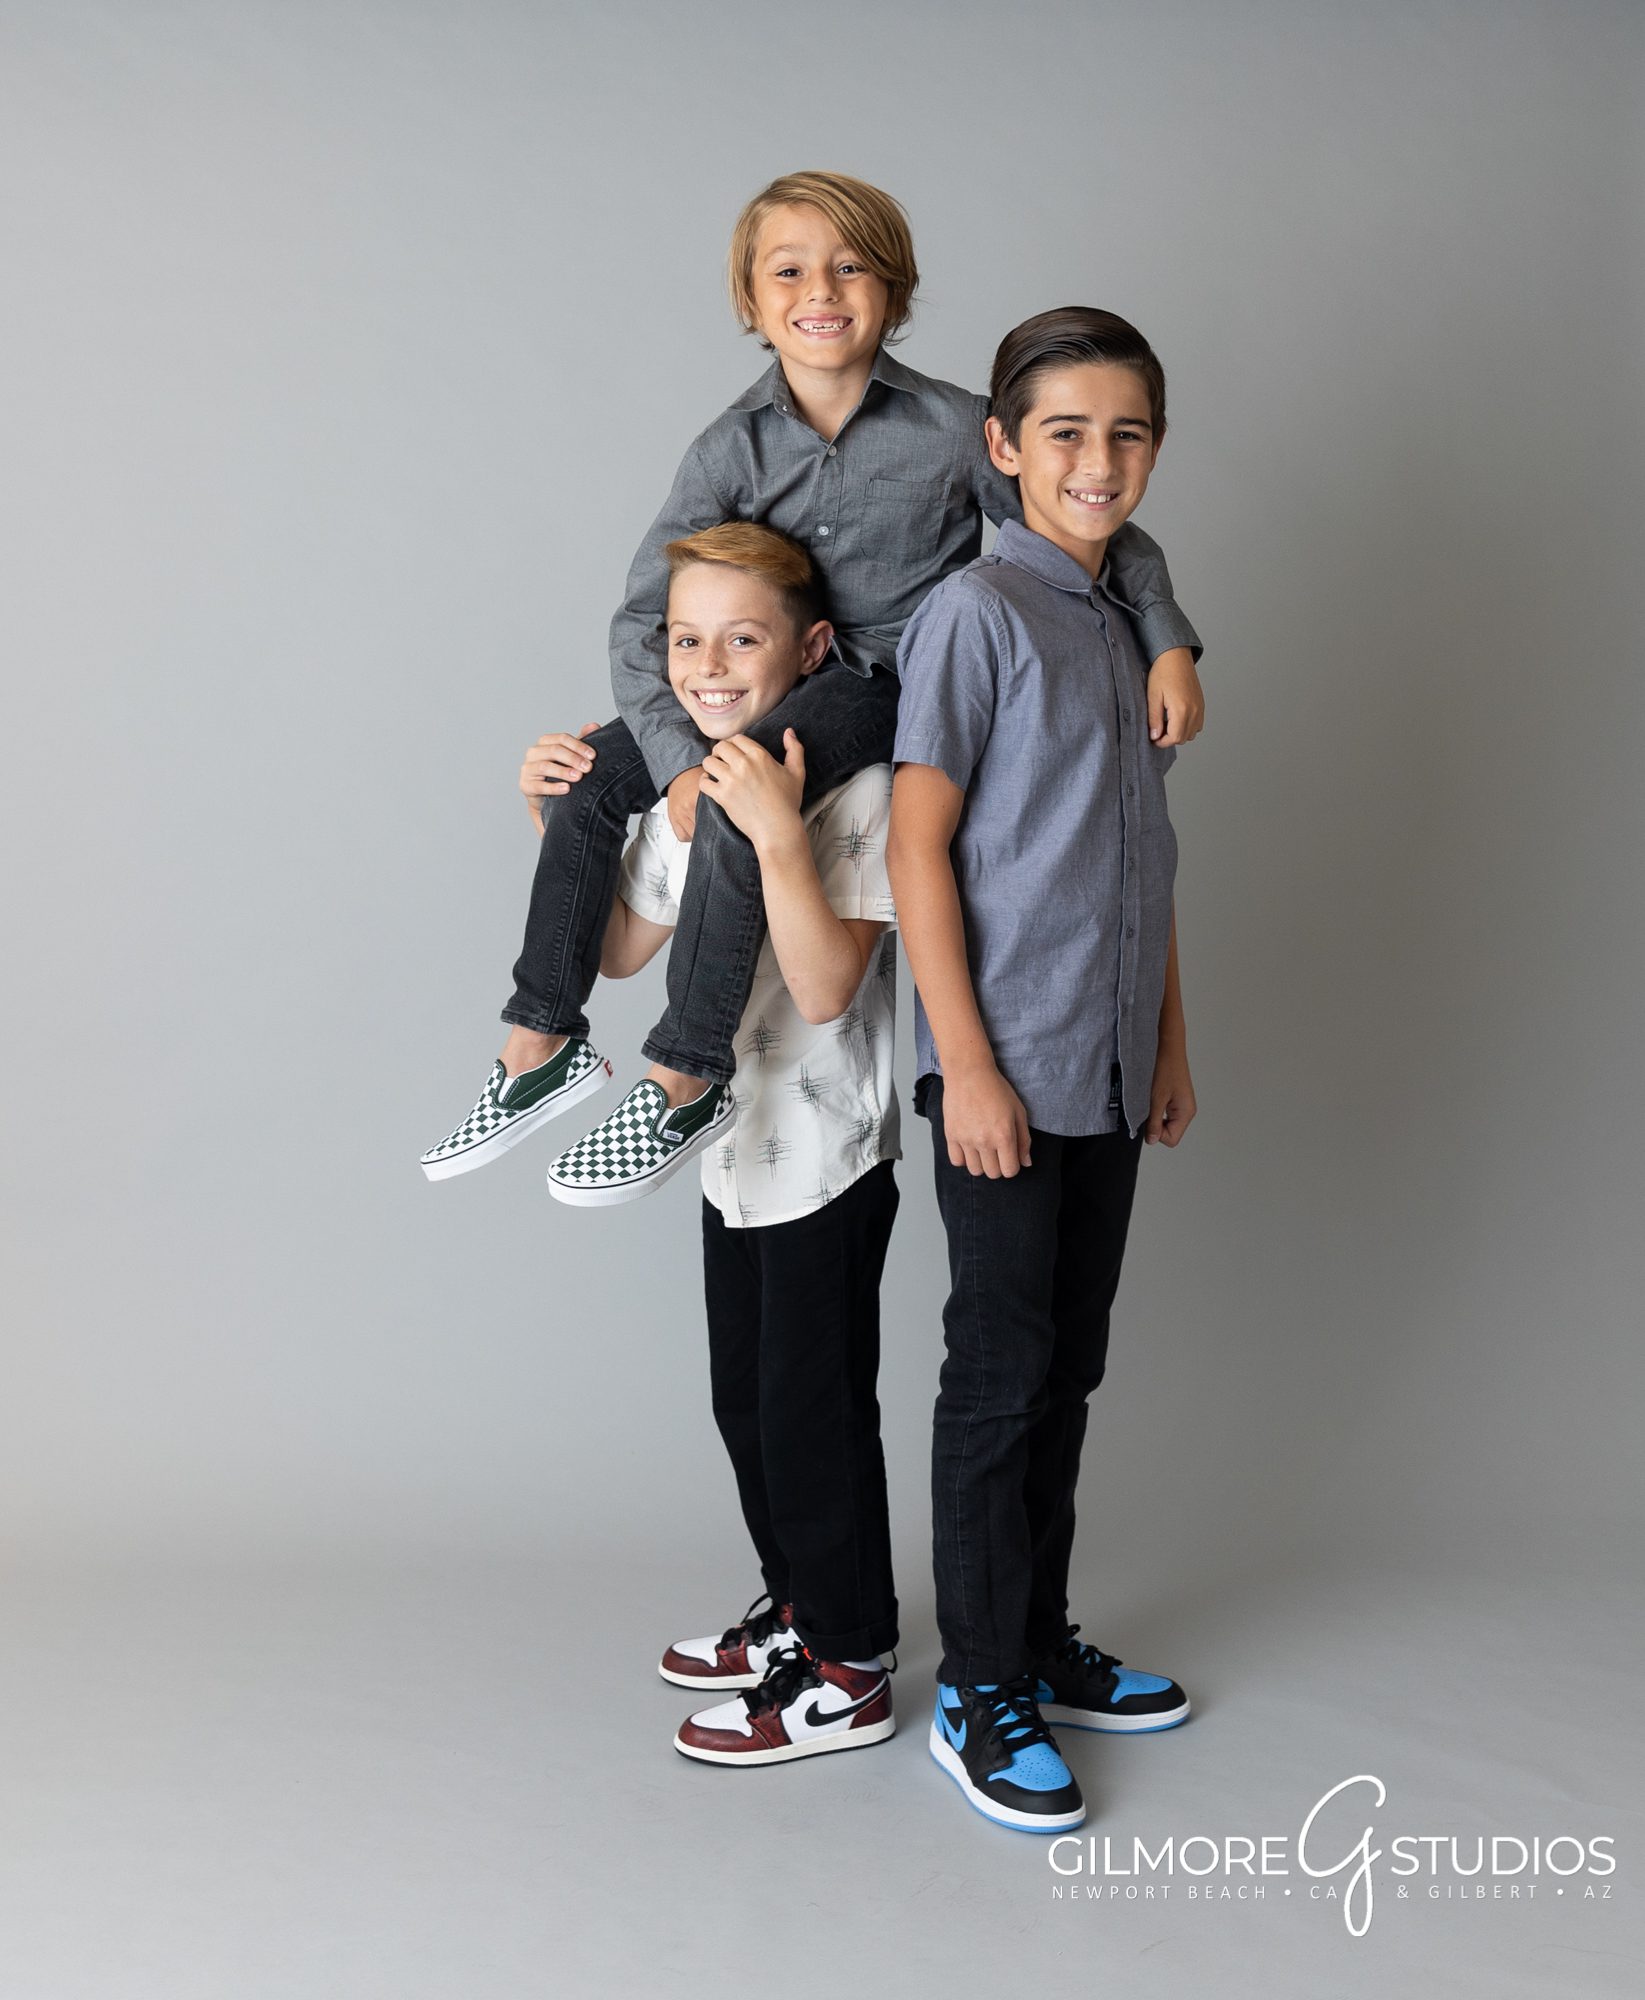 family minis in Orange County, CA - Newport Beach Photographer - Mini Sessions, studio family portrait on seamless gray backdrop. background, solid grey backgrounds, mom, dad, and 3 kids, boys, high key, GILMORE STUDIOS